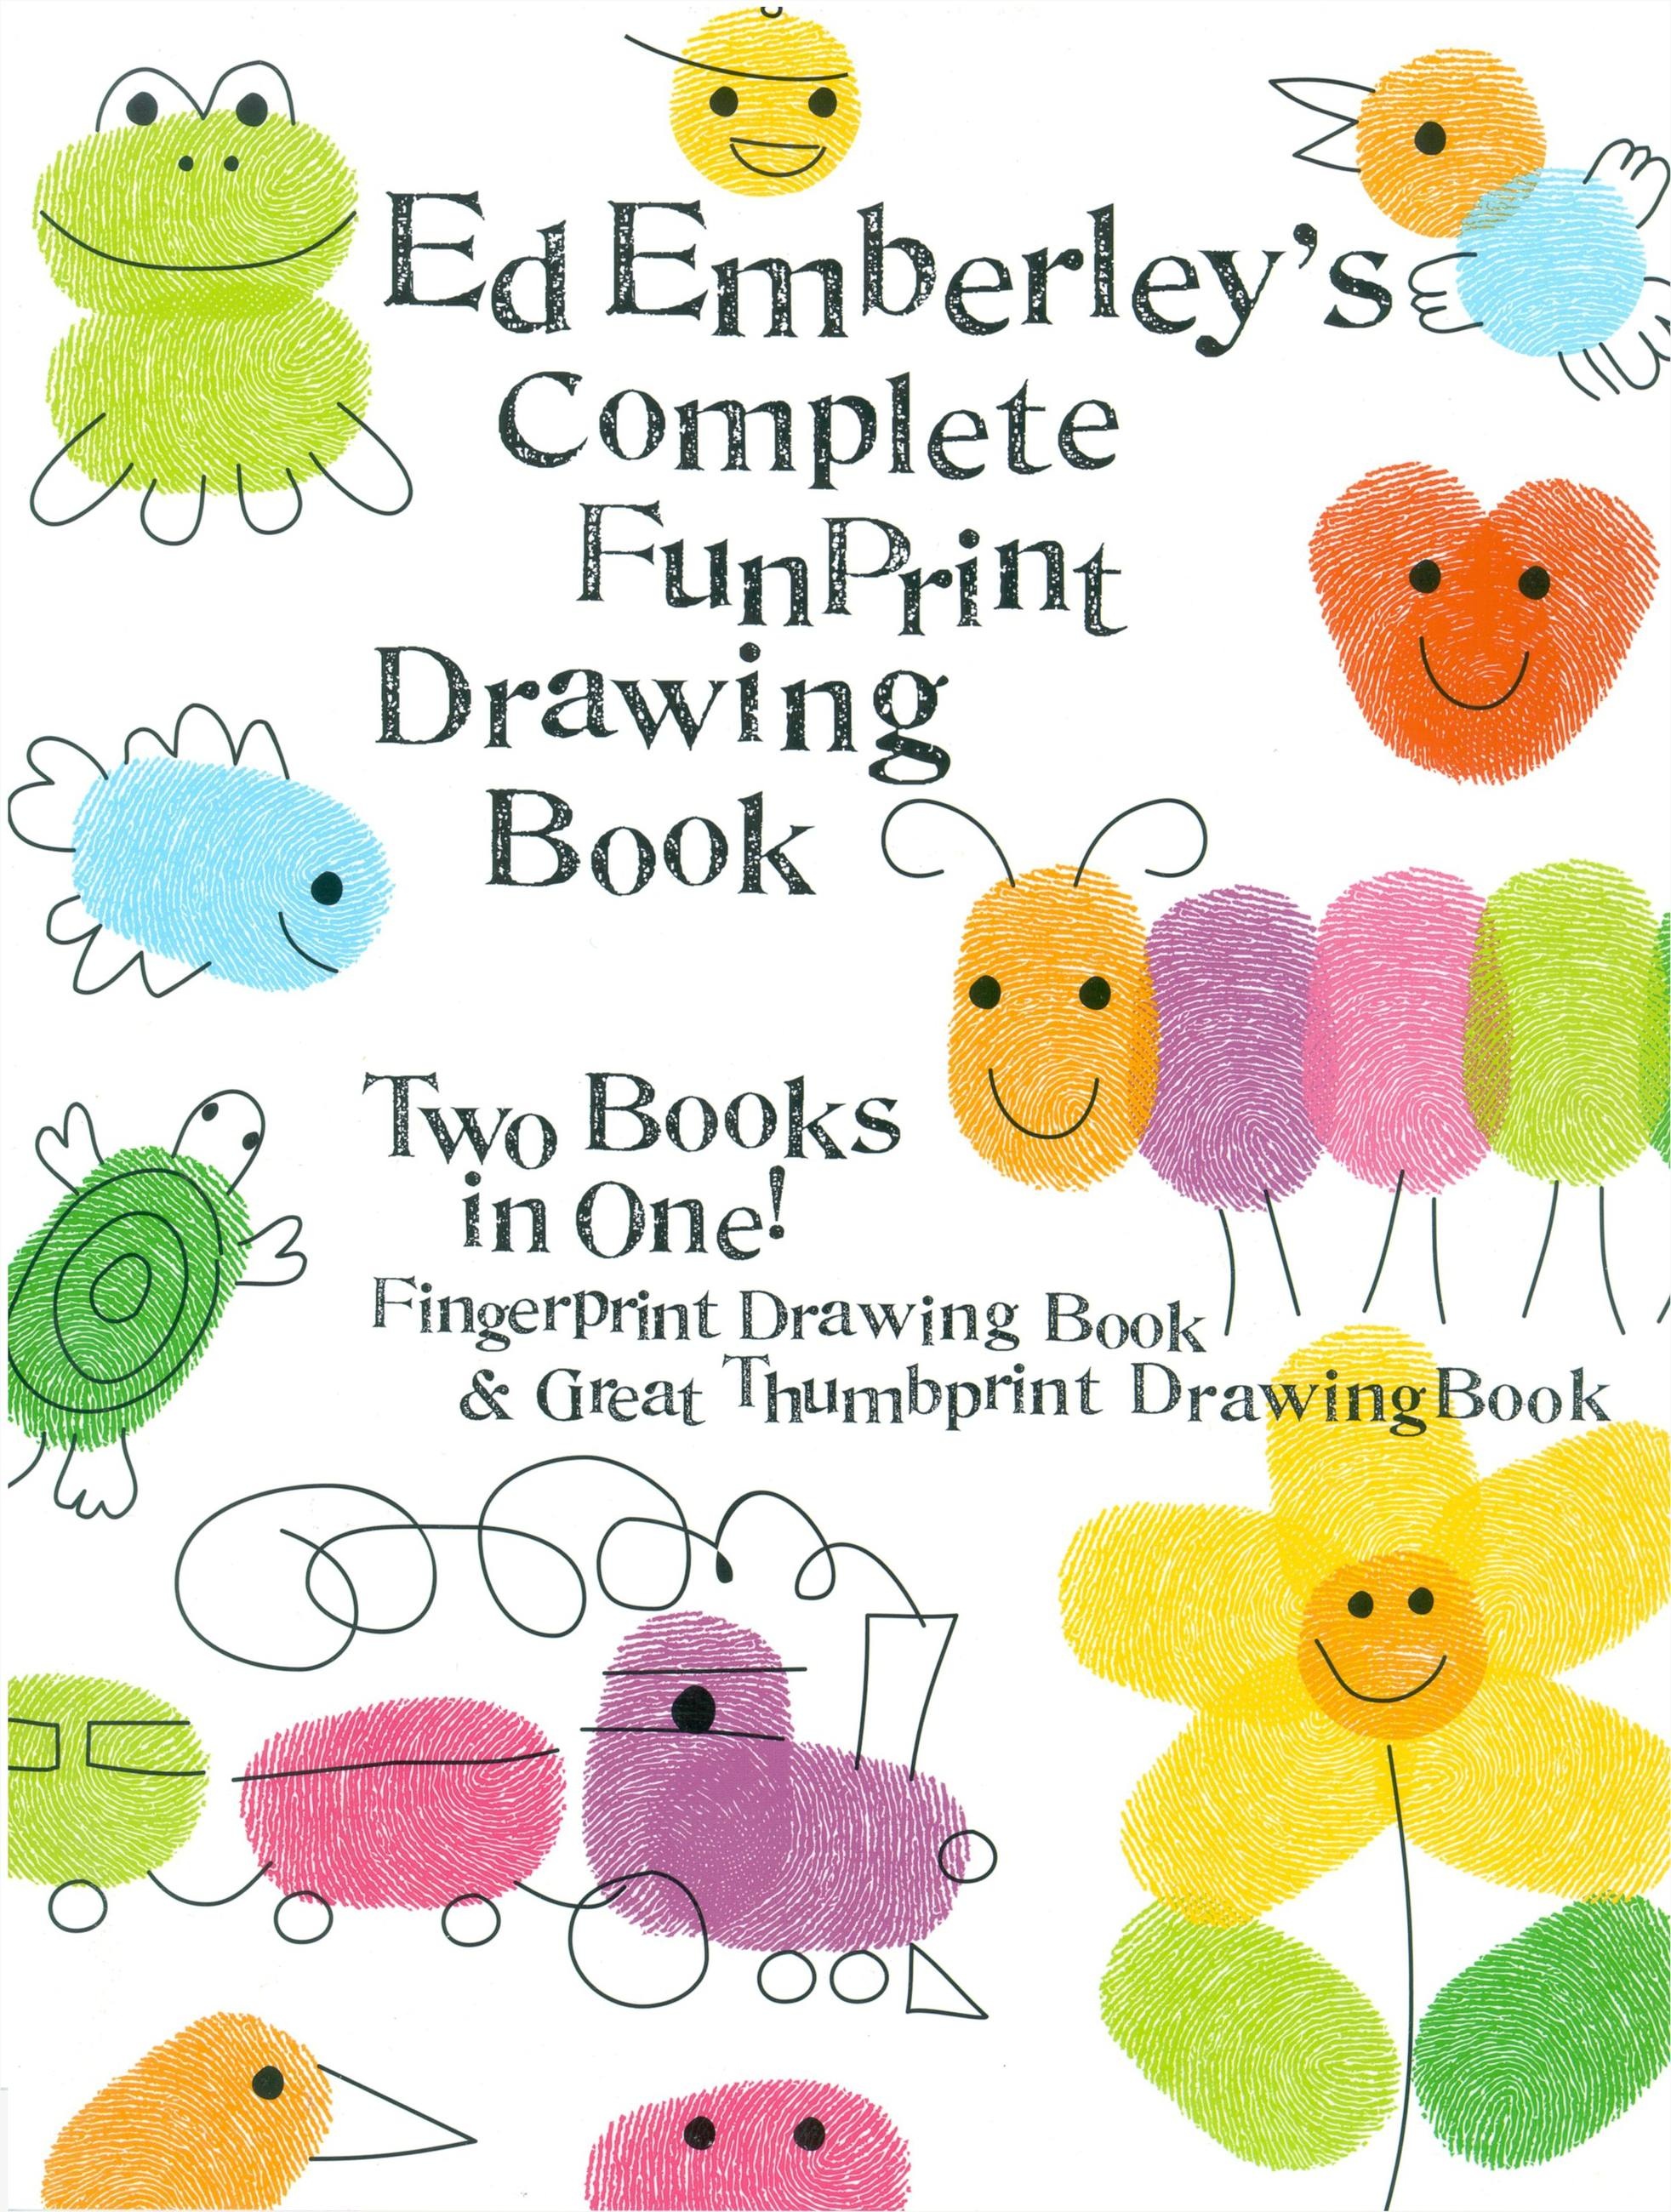 Ed Emberley's Complete Funprint Drawing Book by Ed Emberley | Hachette Book  Group